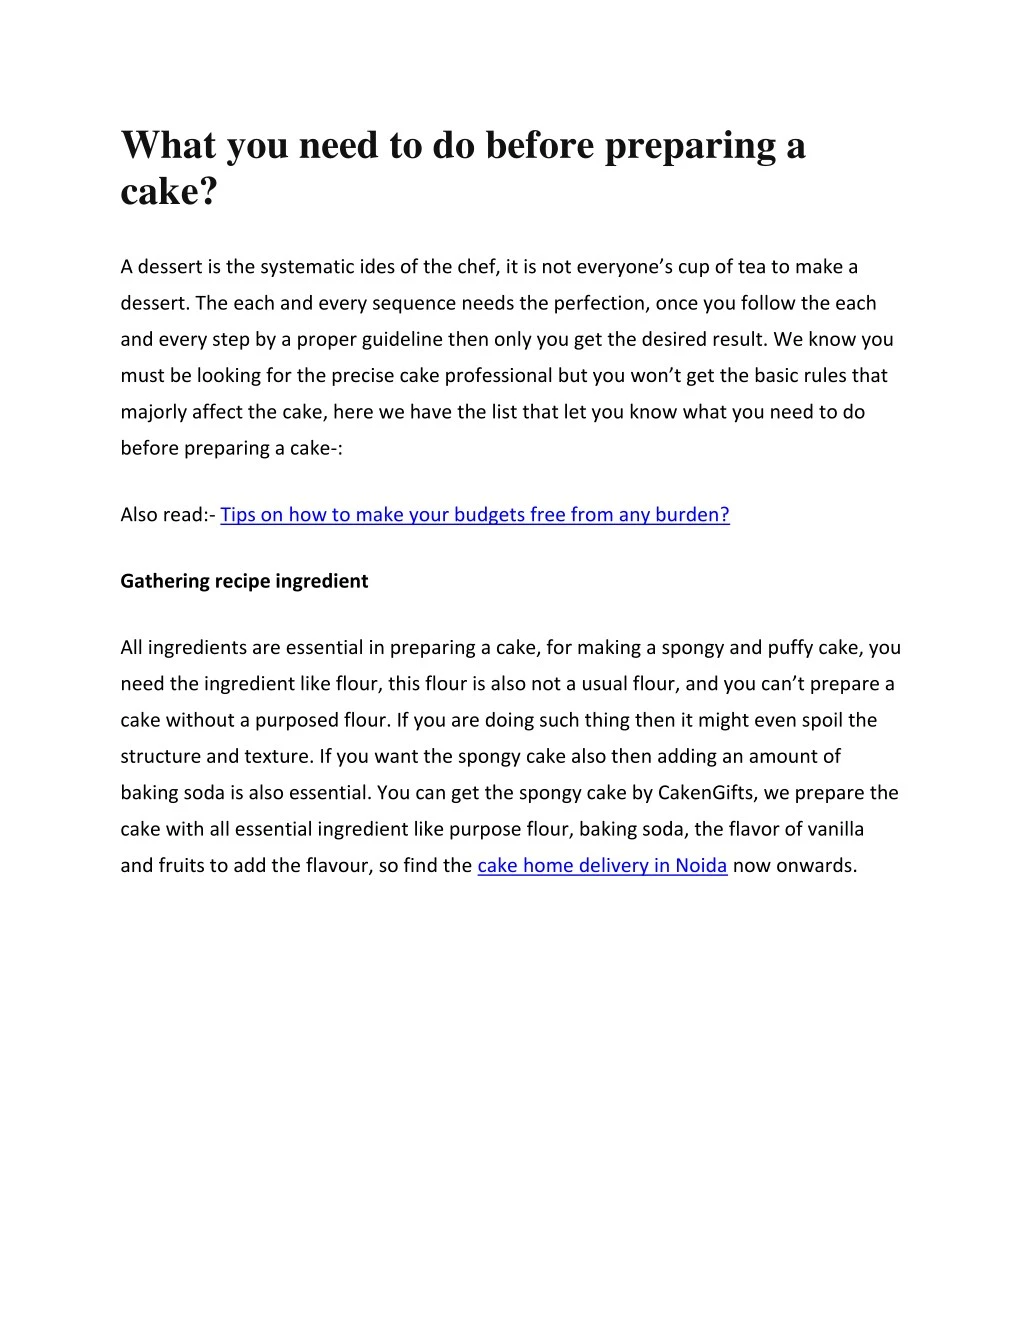 what you need to do before preparing a cake